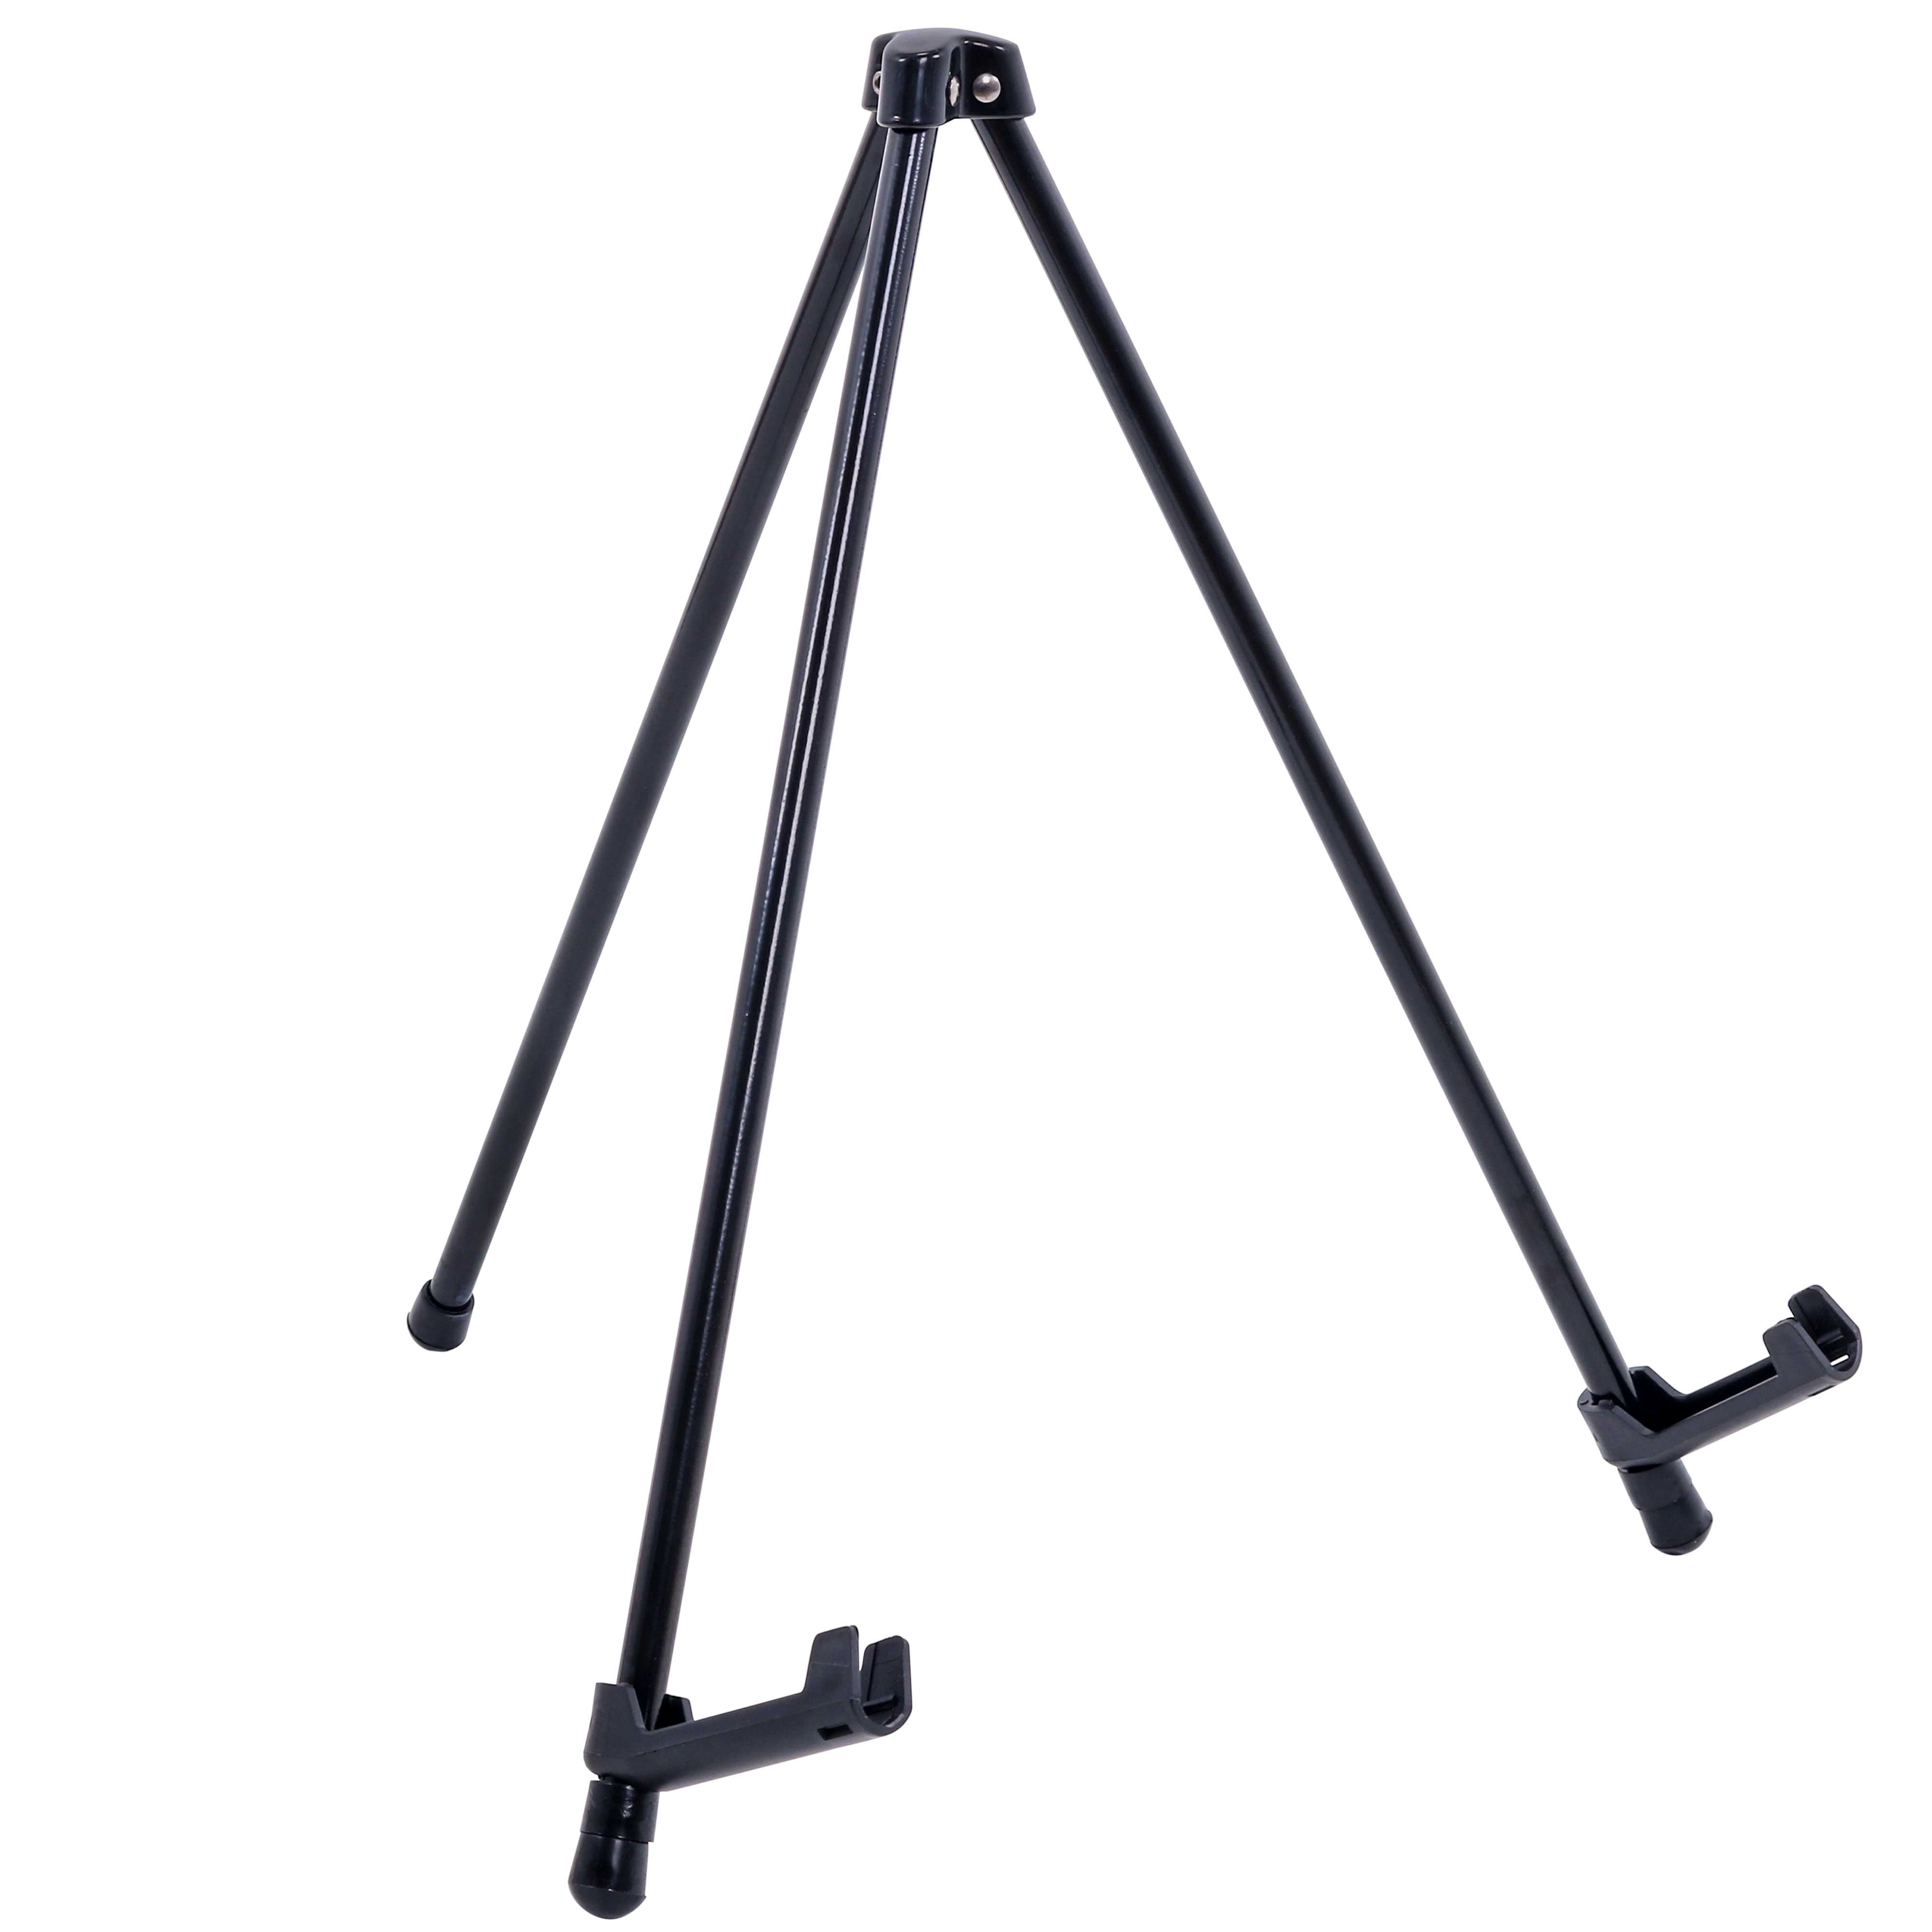 TABLETOP INSTANT EASEL DISPLAY 14" HIGH BLACK STEEL TRIPOD STAND BRAND NEW